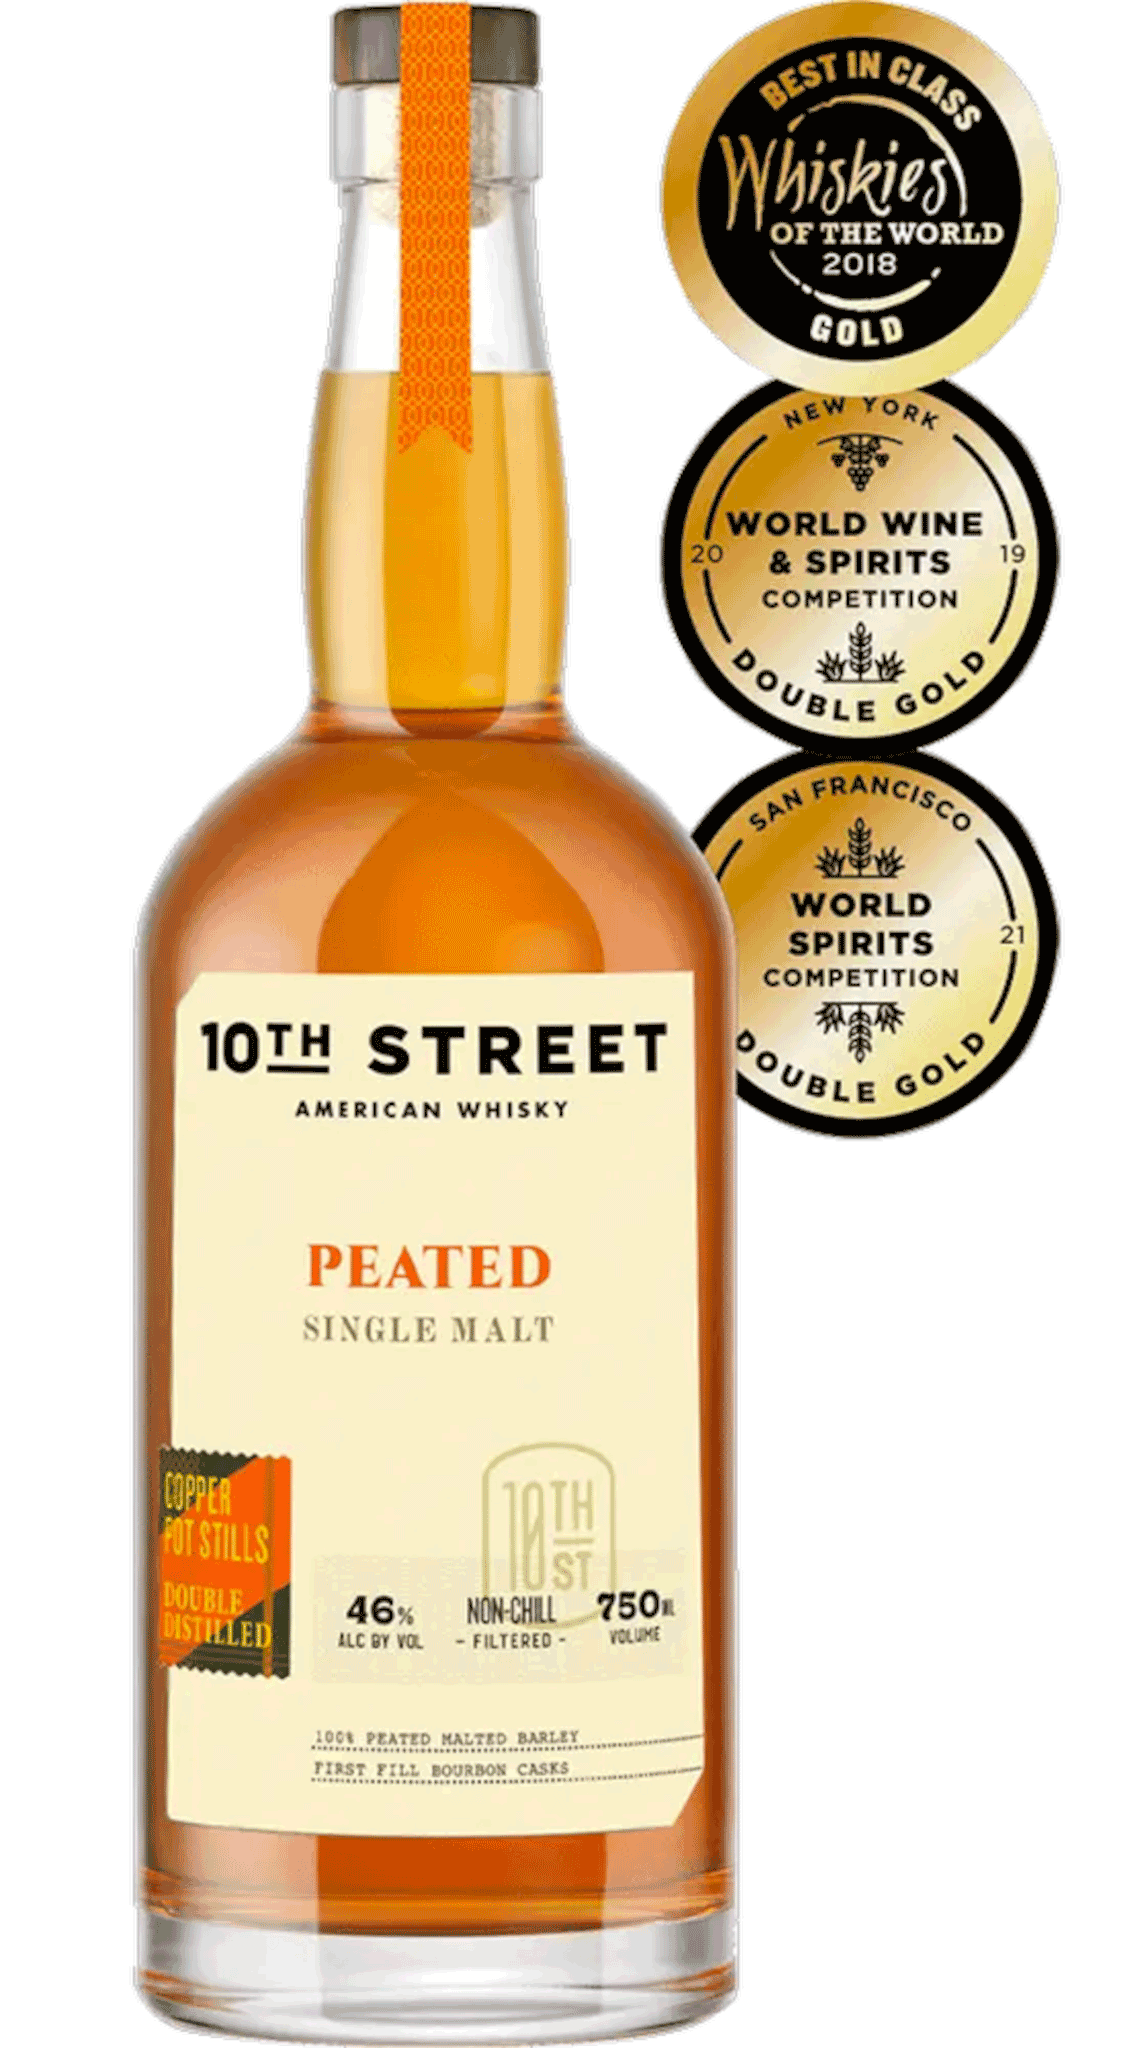 10th Street American Whiskey Peated